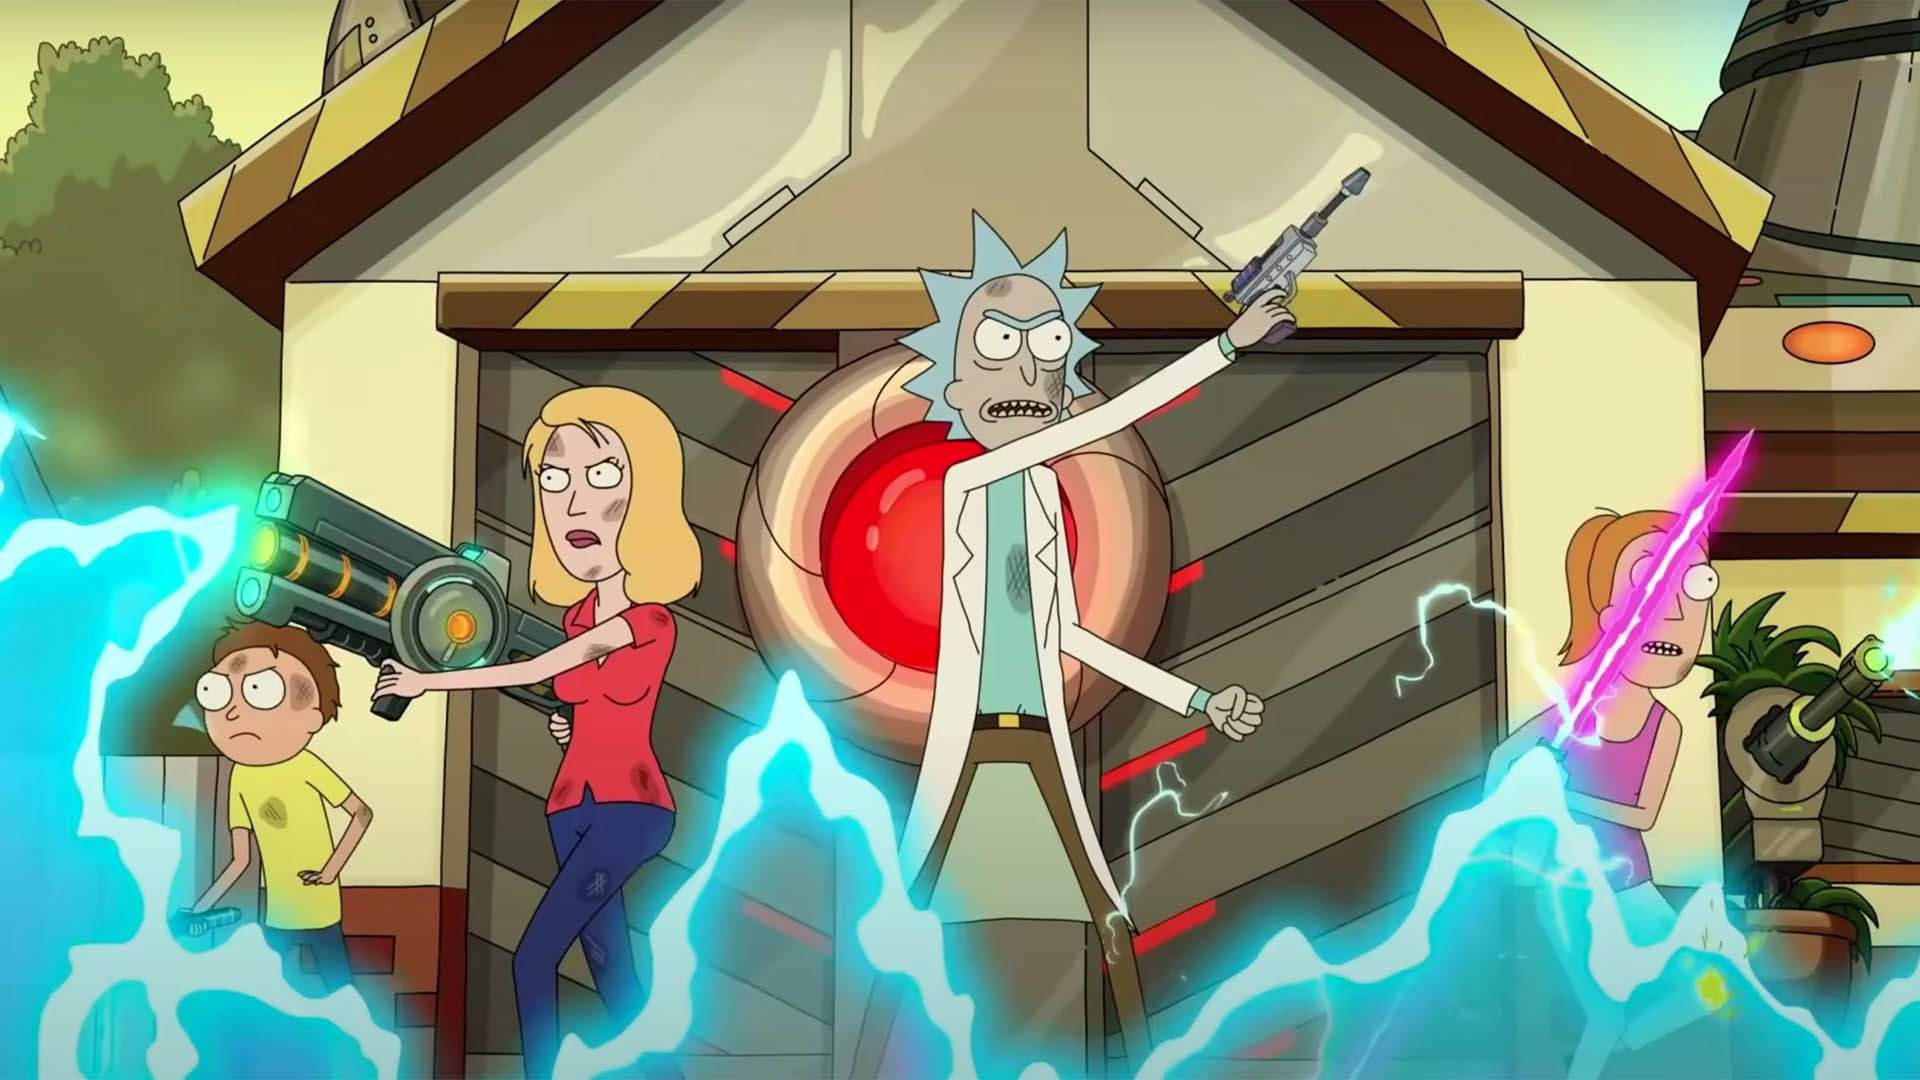 The New Rick And Morty Season Five Trailer Teases Battles Parodies And Plenty Of Sci Fi Chaos Concrete Playground